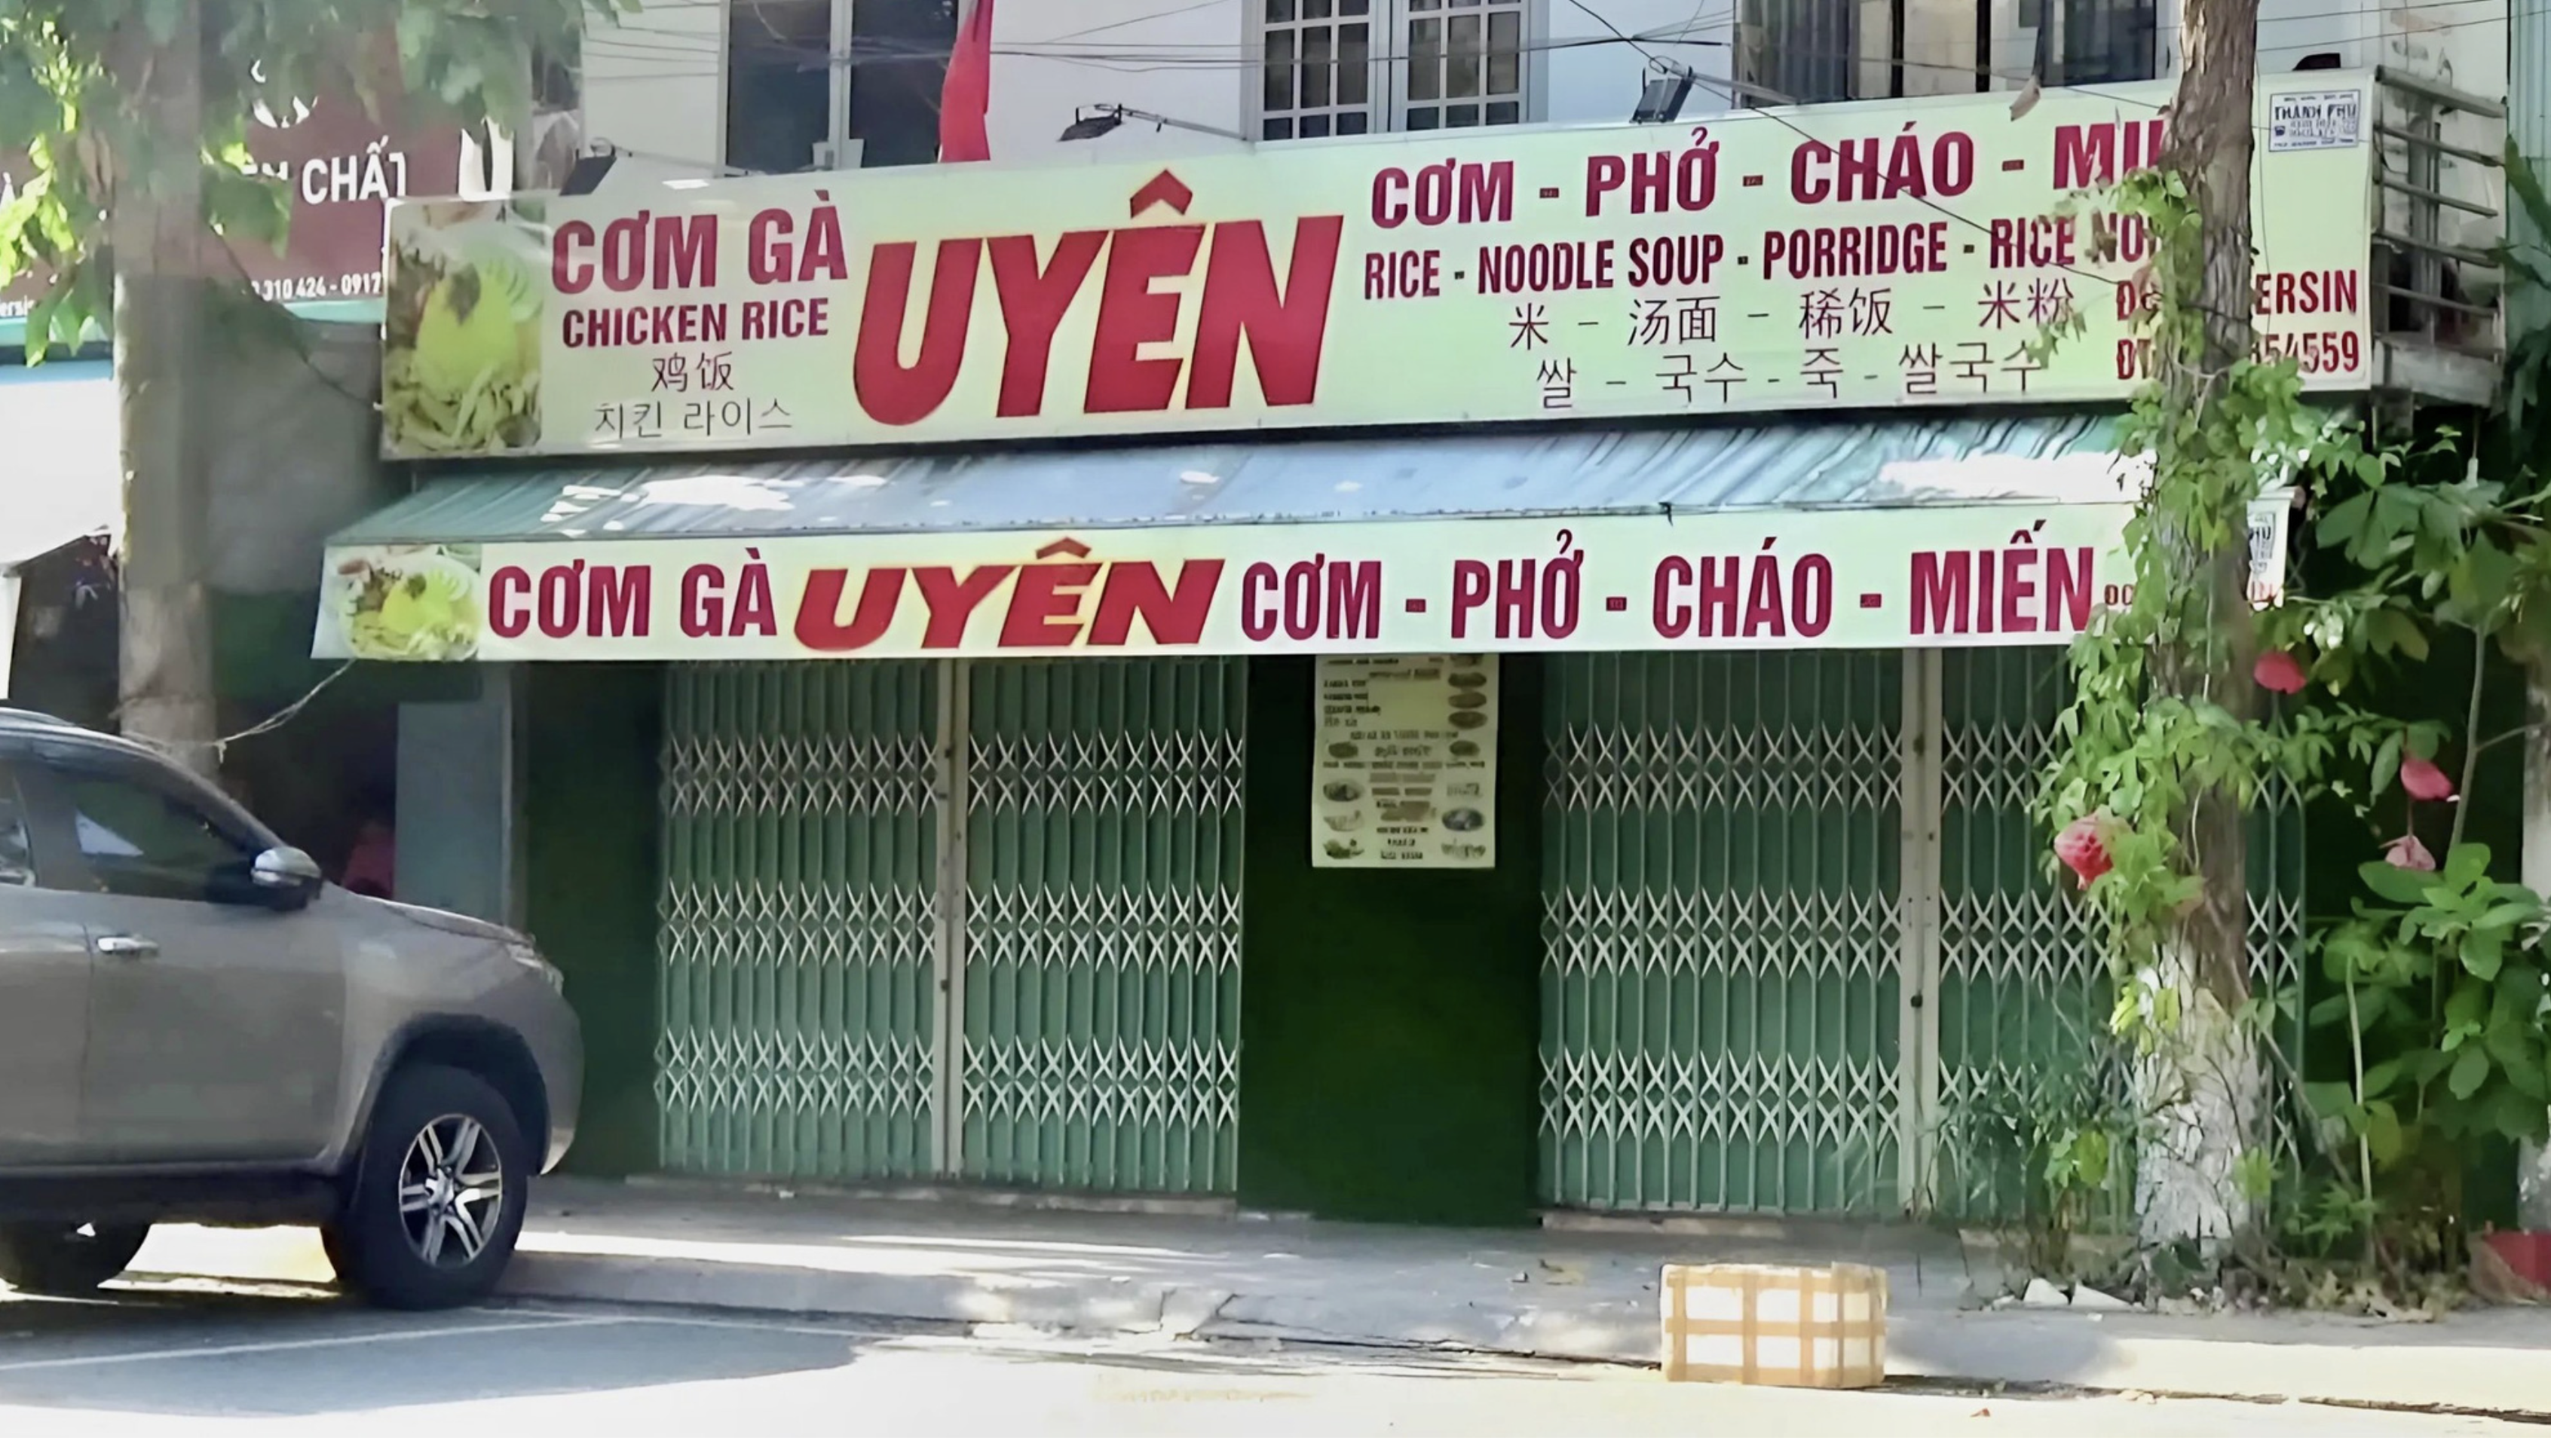 Food poisoning cases lead to chicken rice eatery shutdowns in Vietnam’s Khanh Hoa